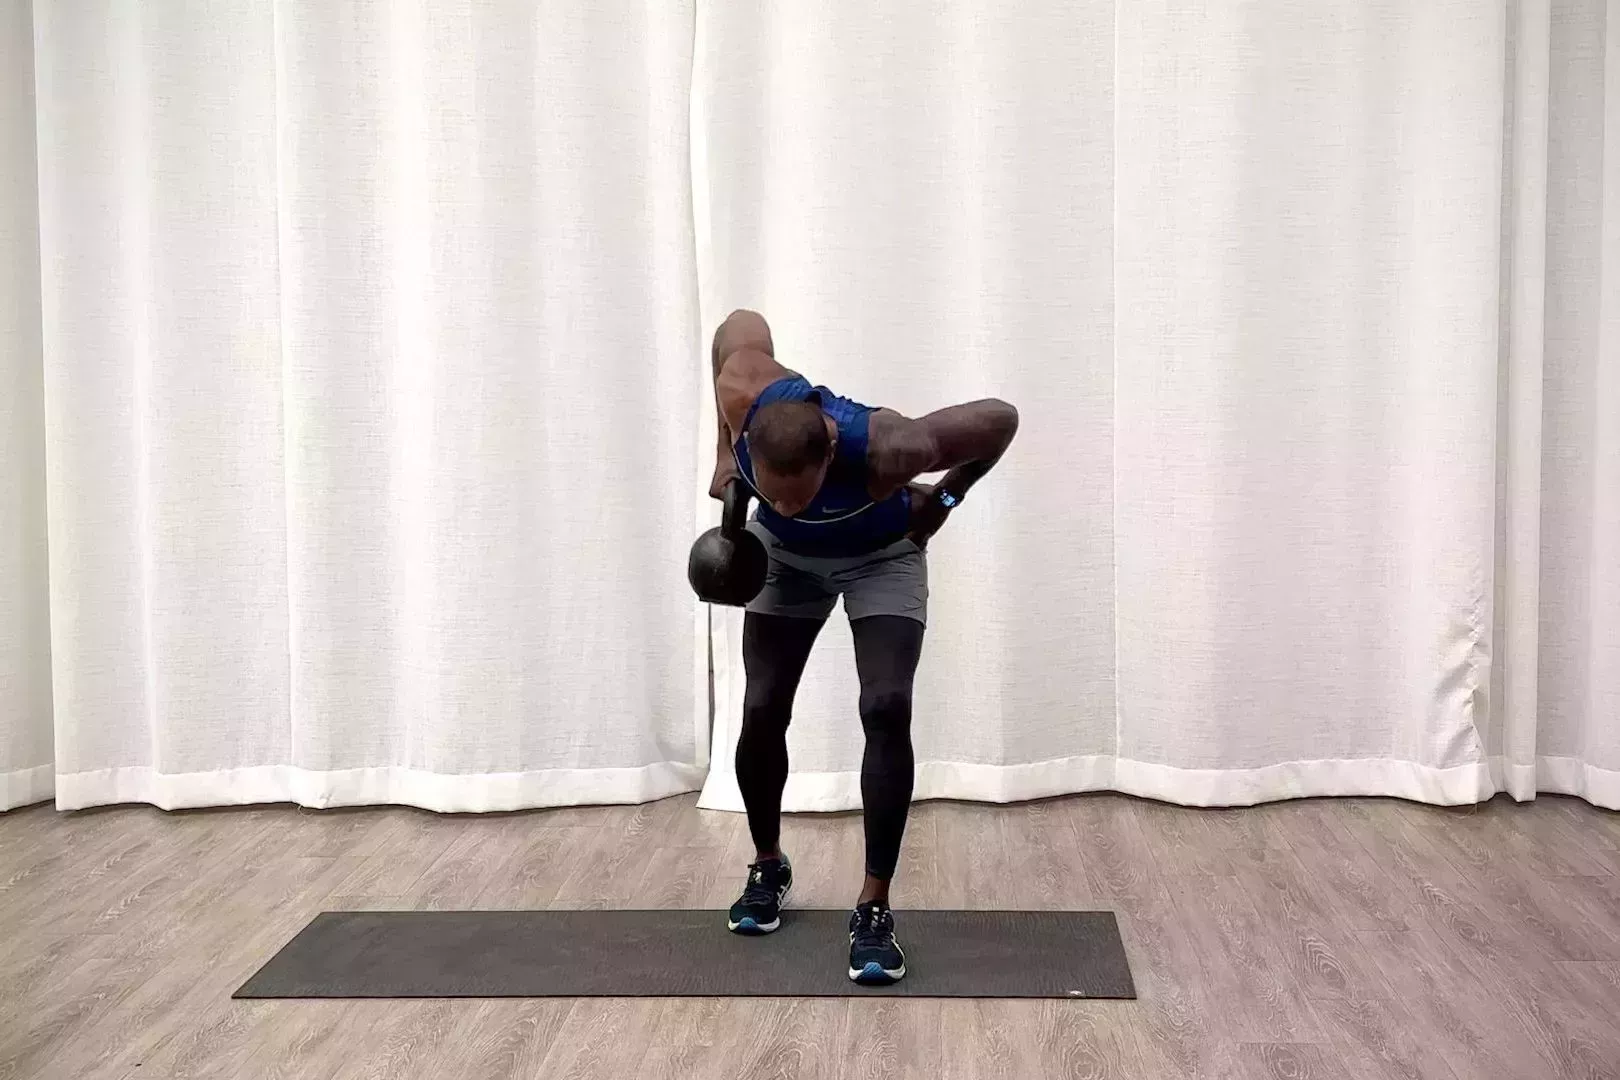 beginner kettlebell workout, jeffers practices the split stance deadlift to bent over row exercise